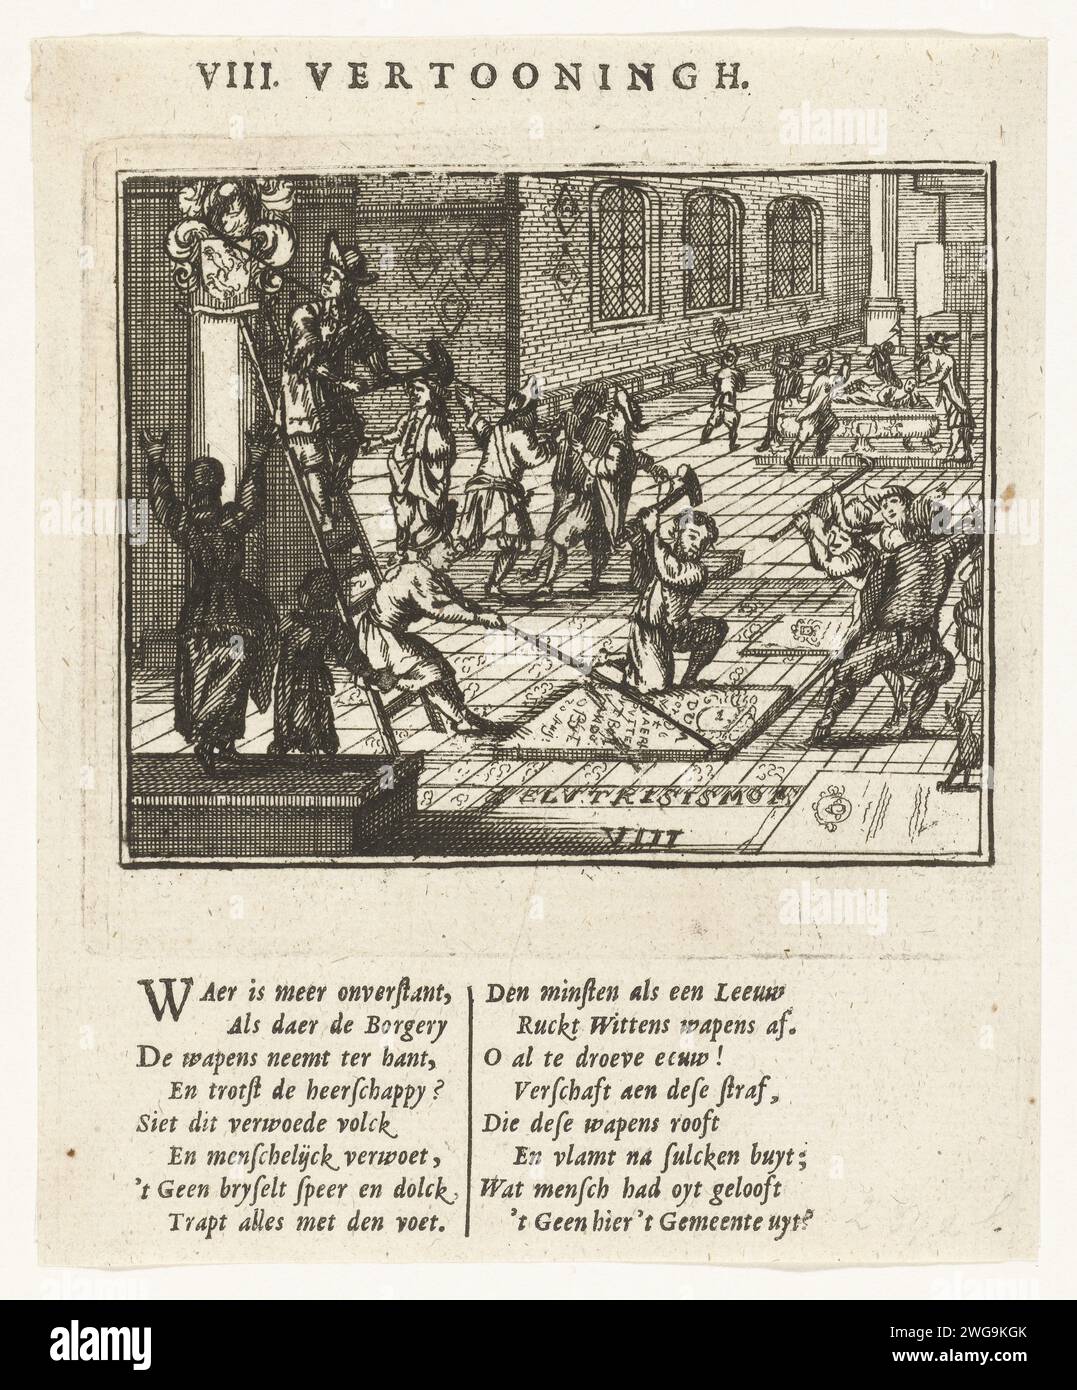 Destroying the Counts of the De Witt family in the churches of The Hague, 1672, 1672 print The Hague Burgerij destroys the graves of members of the De Witt family in the church, 1672. Scene from the life of Johan and Cornelis de Witt; Part of a group of illustrations, numbered: VIII. Showing and accompanied by a verse of 8 lines. Printed on the back with text in Dutch. print maker: Southern Netherlandsafter print by: Antwerp paper etching / letterpress printing destruction of monuments, portraits, etc. ( revolution) The Hague Stock Photo